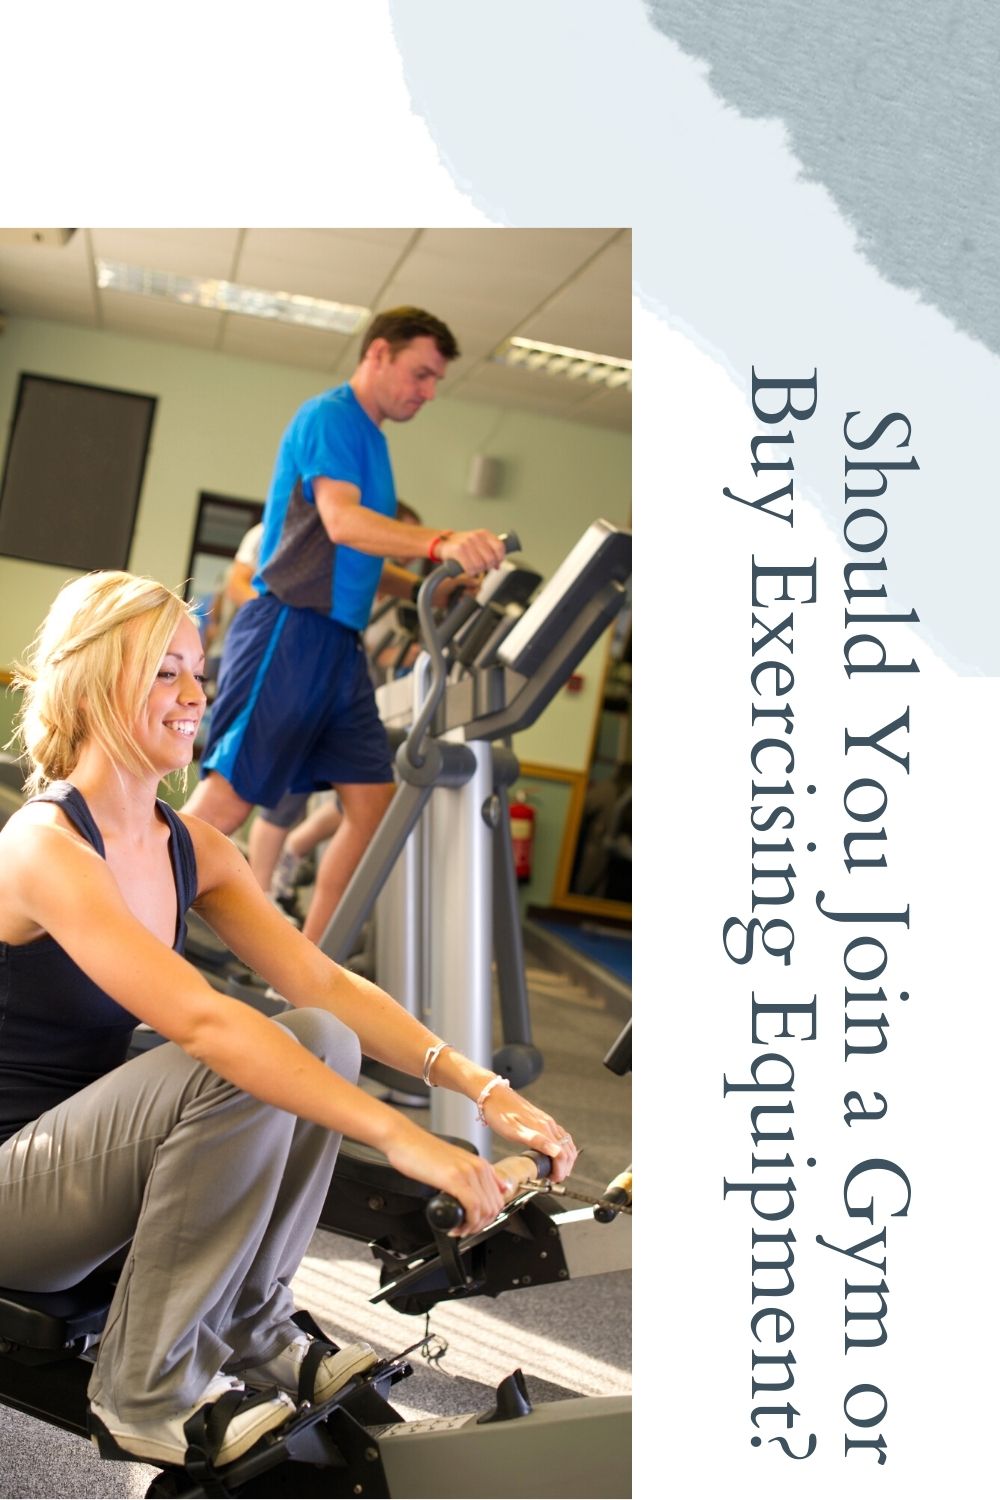 Should You Join a Gym or Buy Exercising Equipment